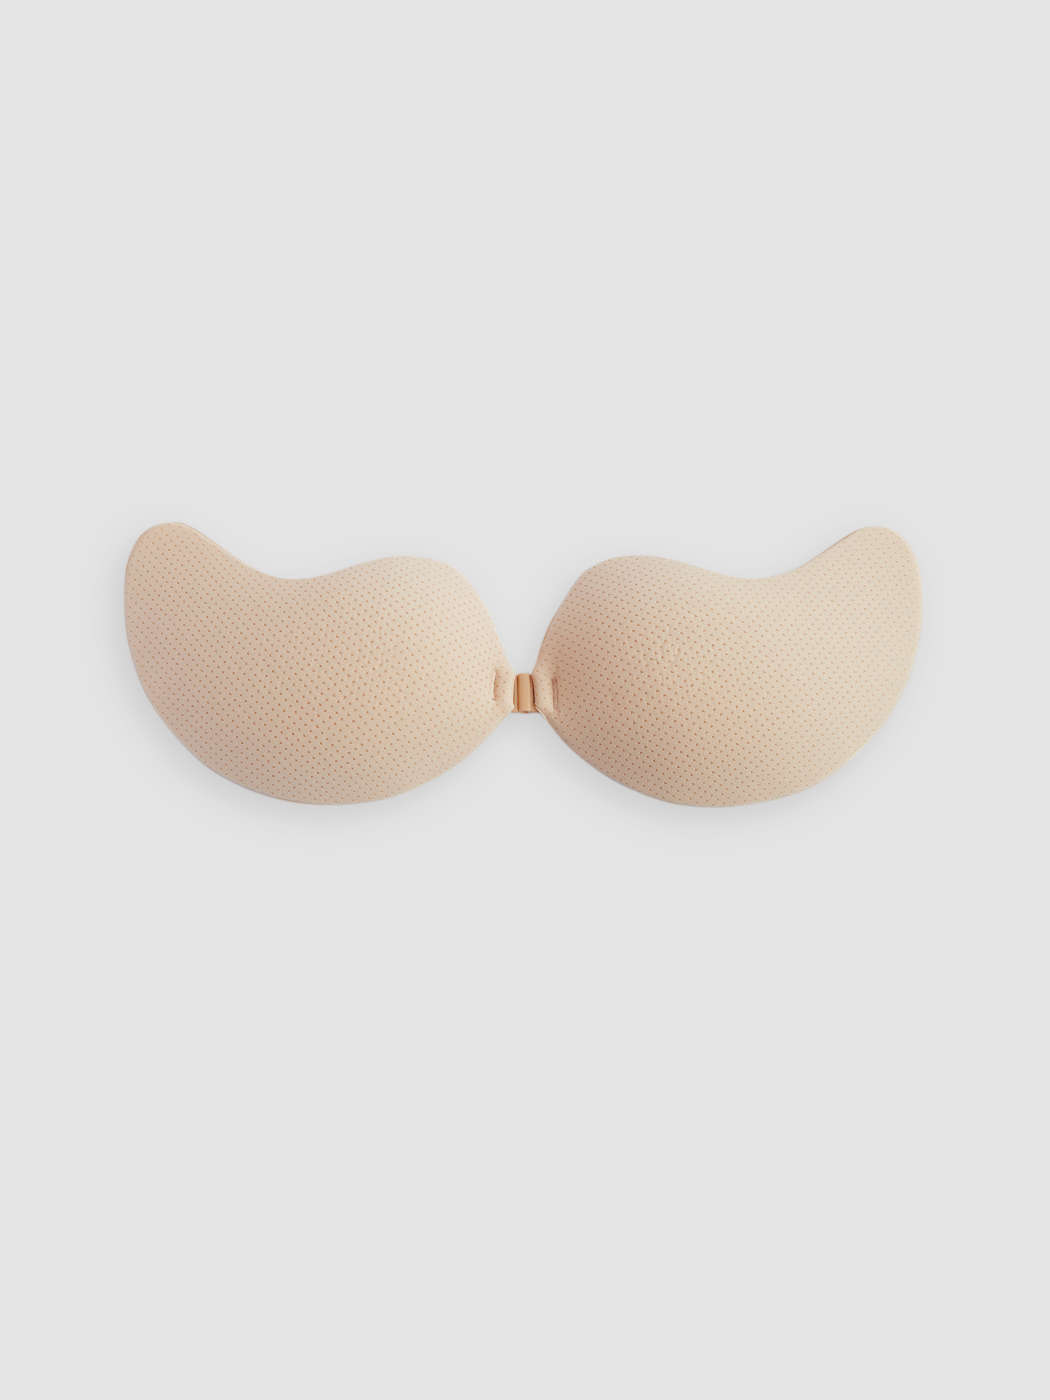 Reusable Adhesive Push Up Nipple Cover - Cider